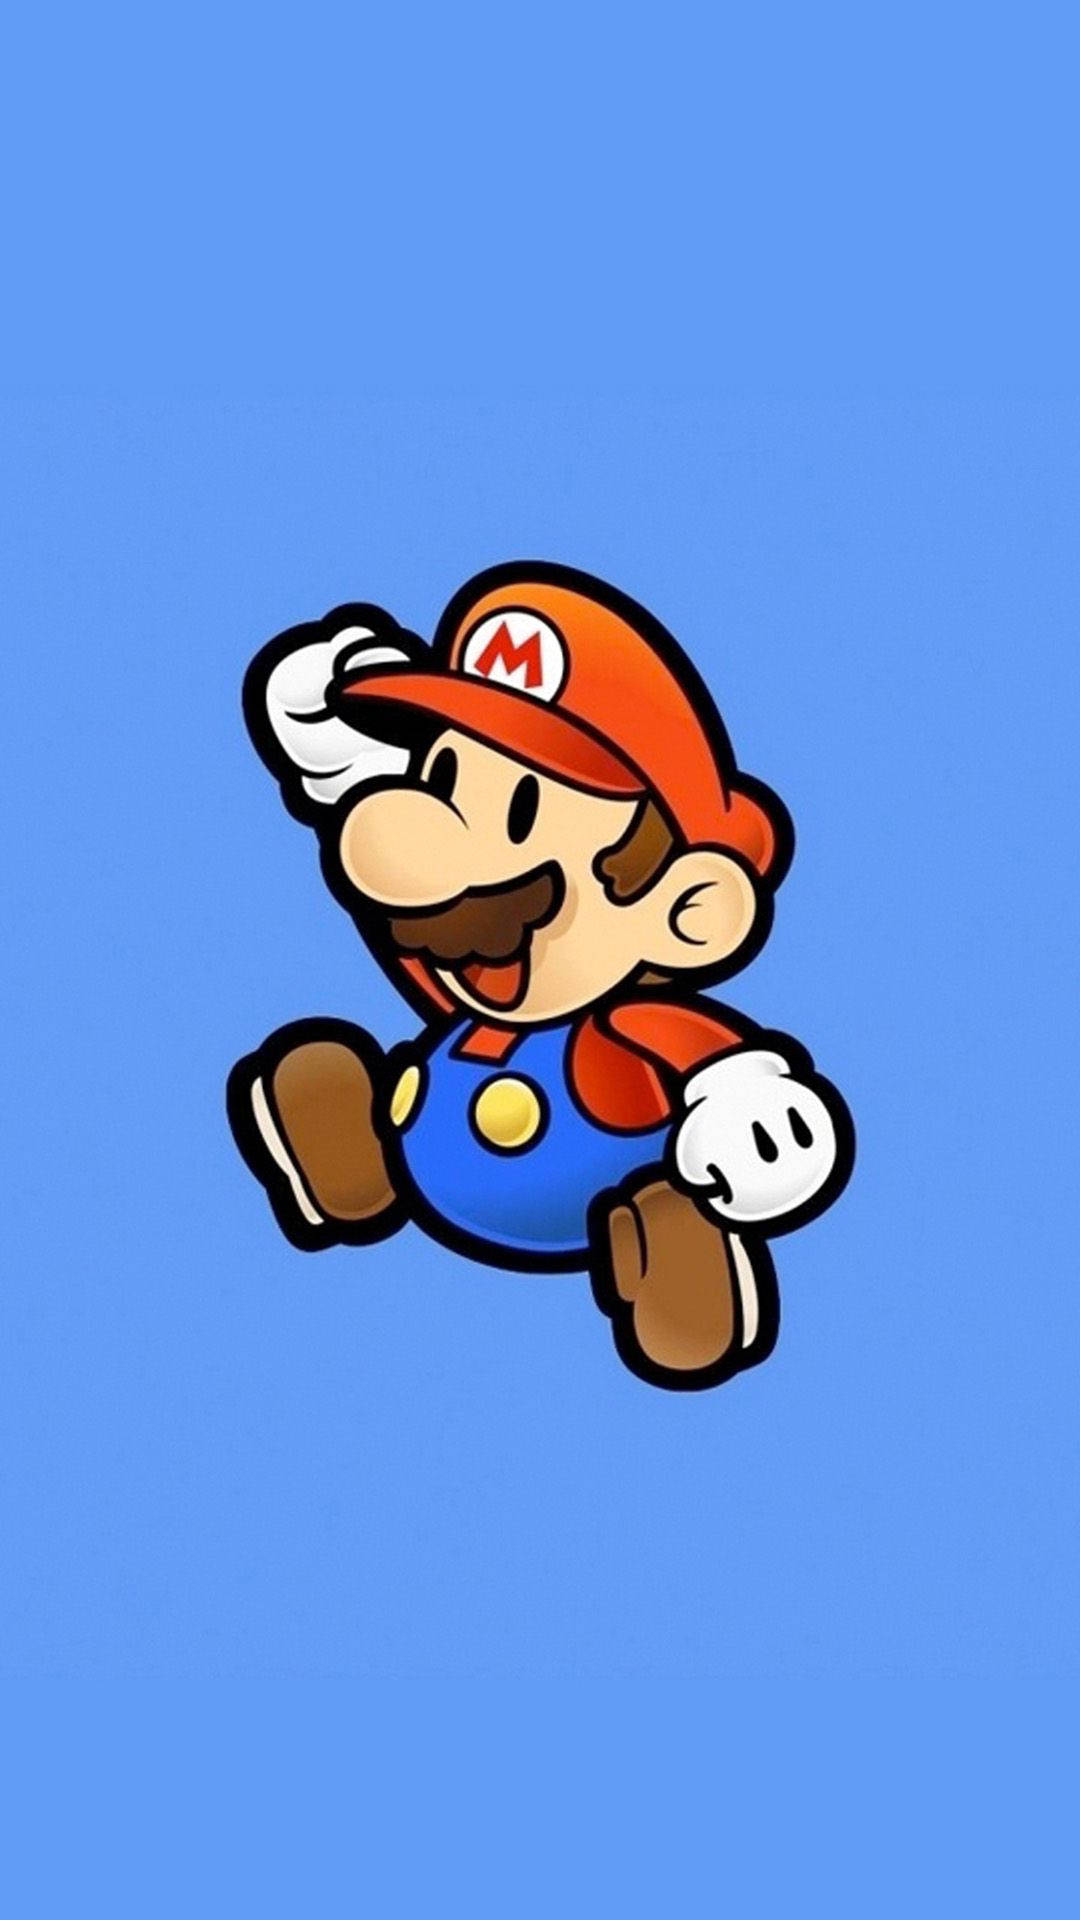 Jumping High with Super Mario Wallpaper